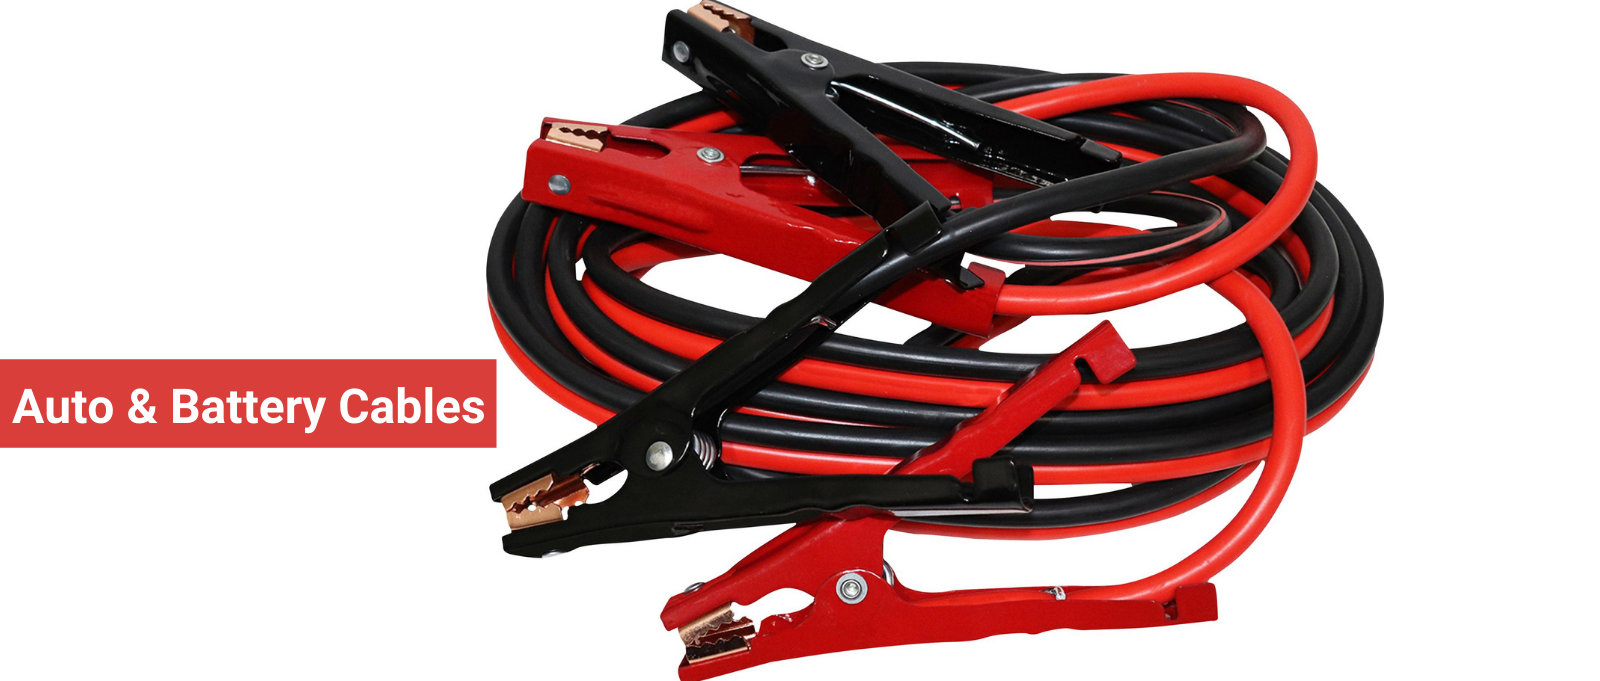 Manufacturers of Auto and Battery Cables in Mumbai